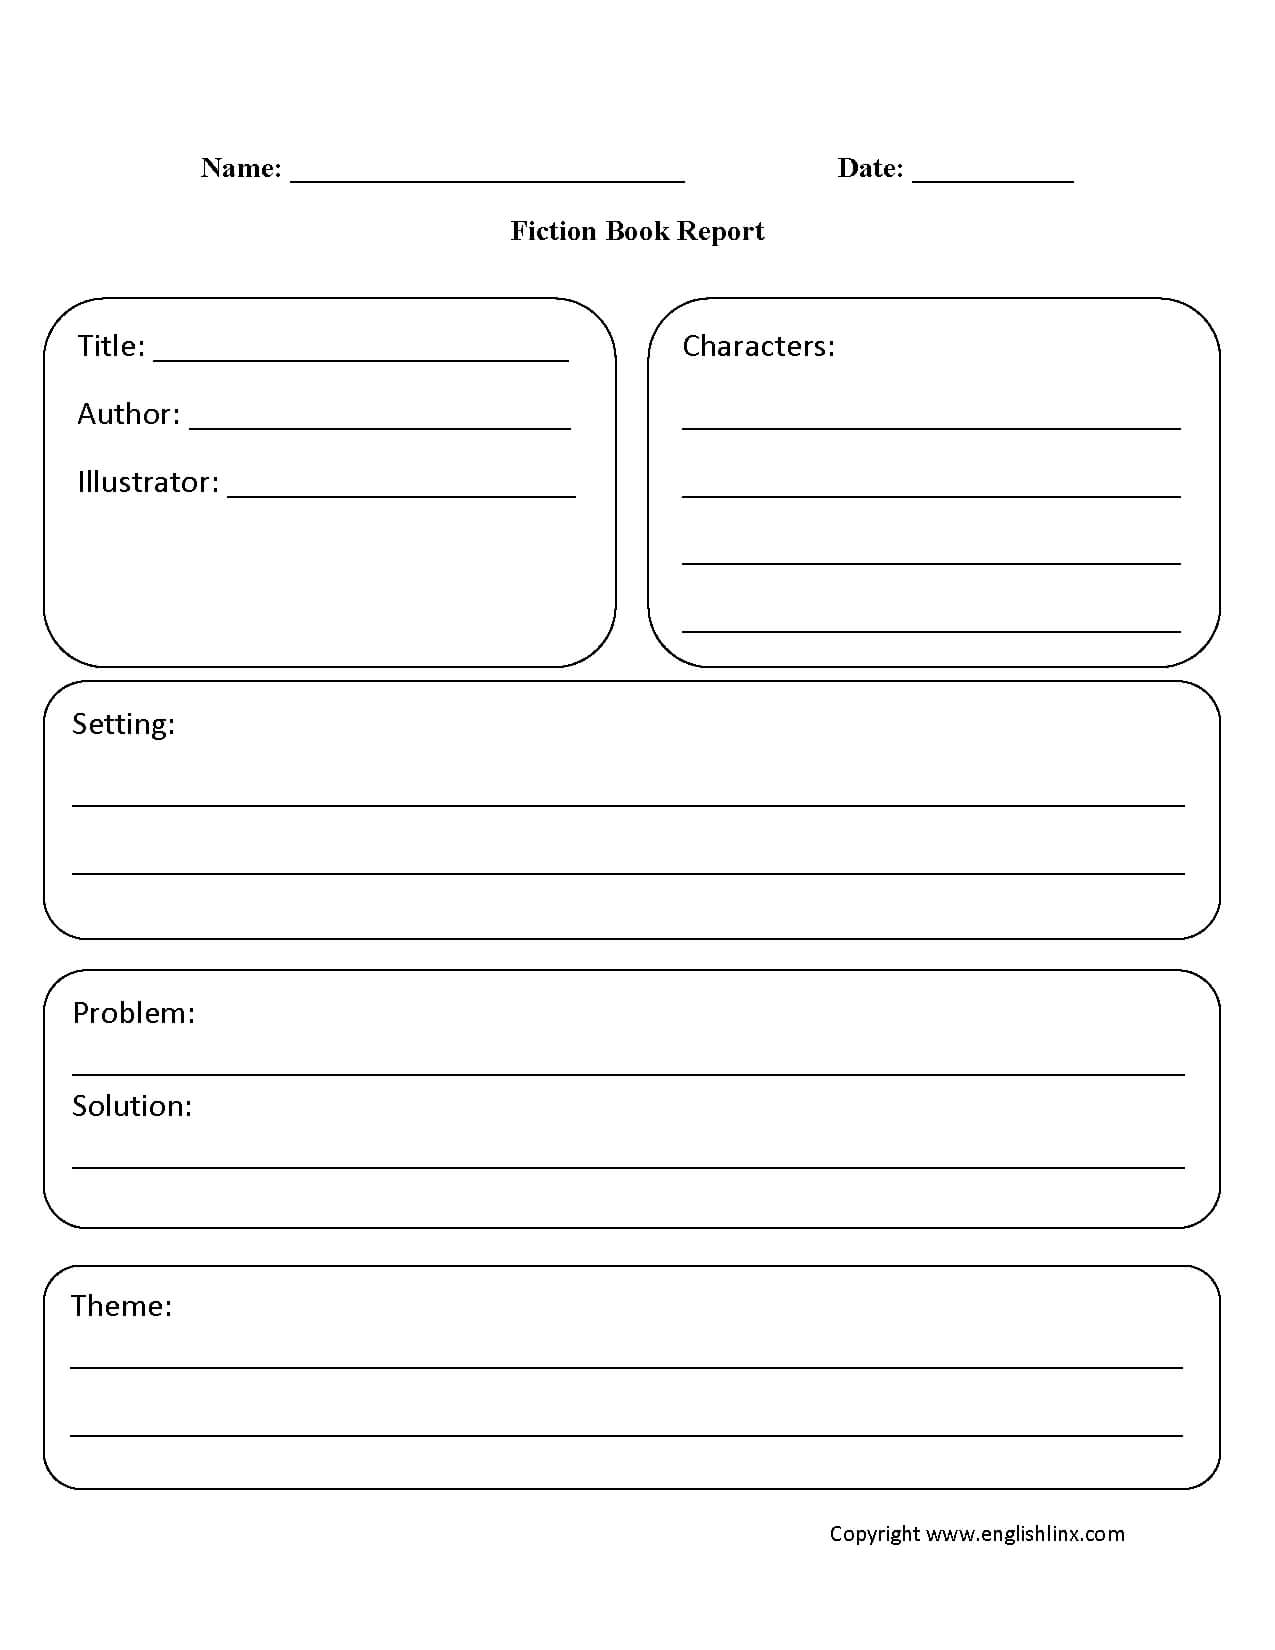 Englishlinx | Book Report Worksheets Pertaining To Biography Book Report Template